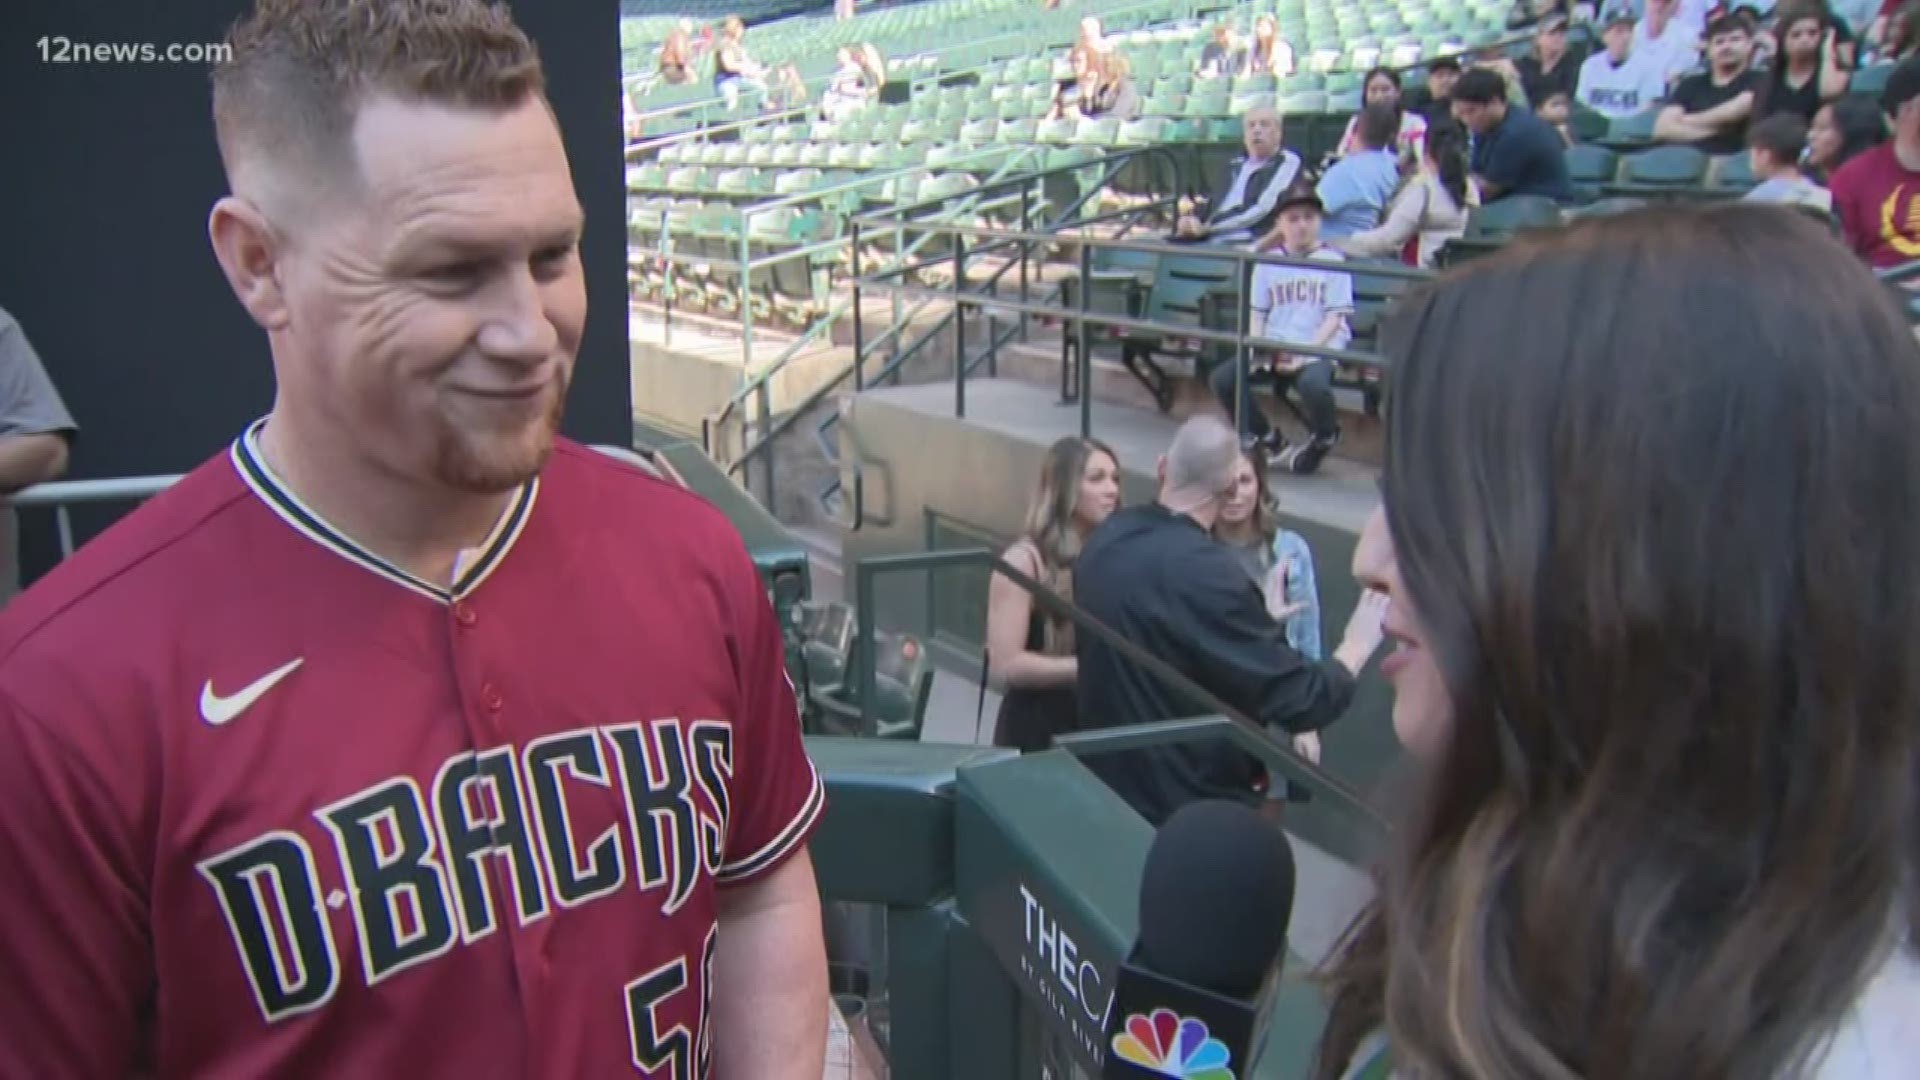 Valley native Kole Calhoun relishes opportunity to play for D-backs